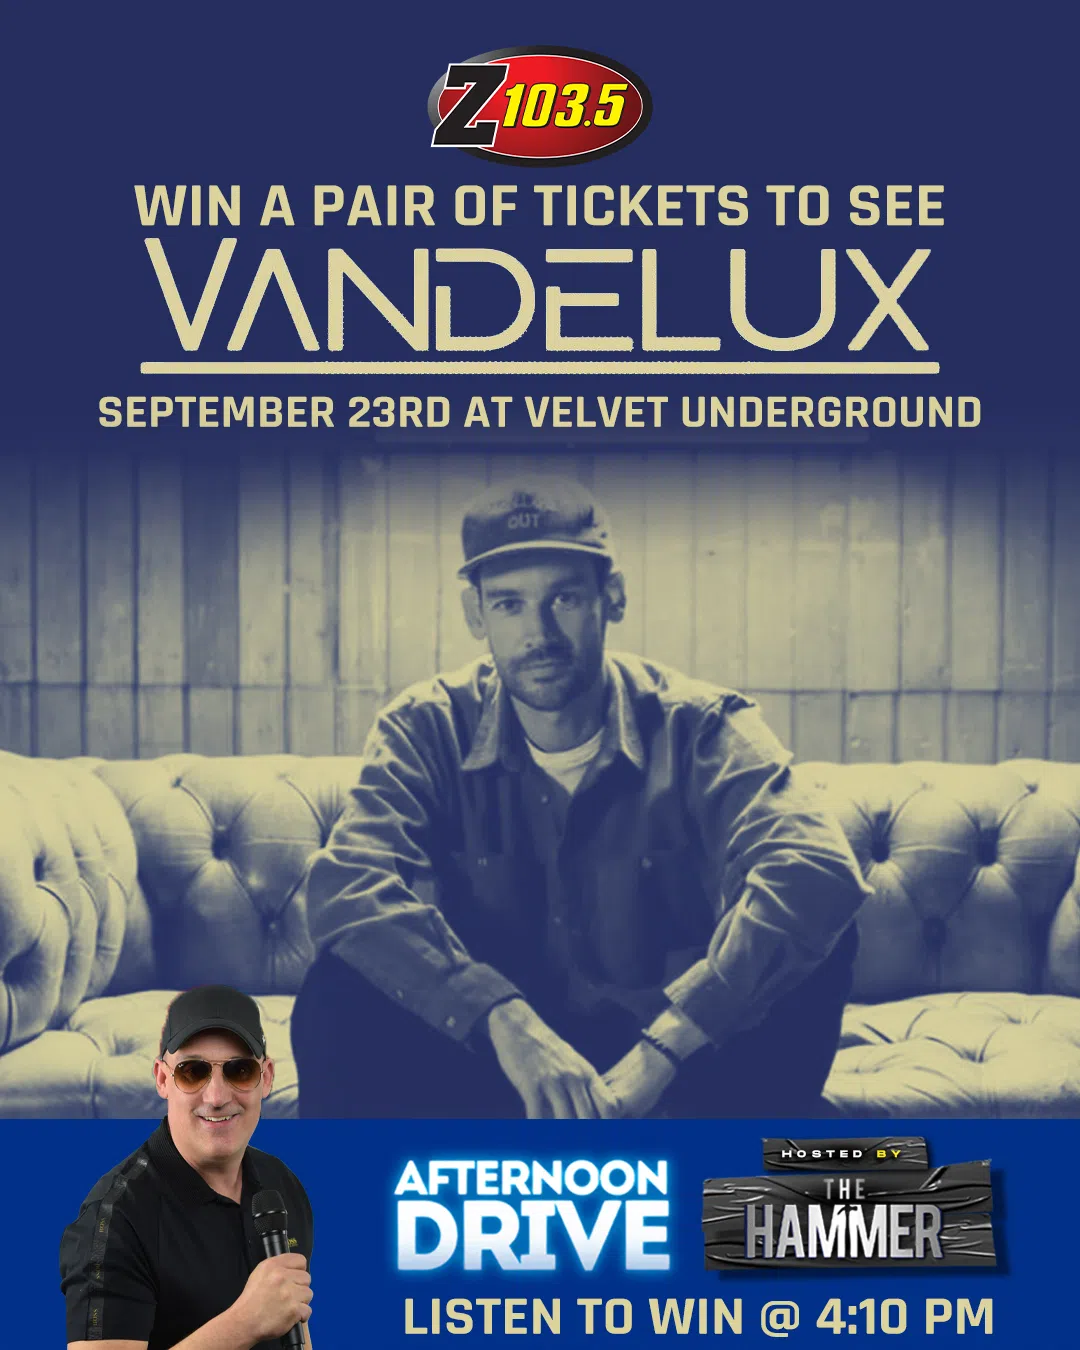 Feature: https://z1035.com/win/win-a-pair-of-tickets-to-see-vandelux/